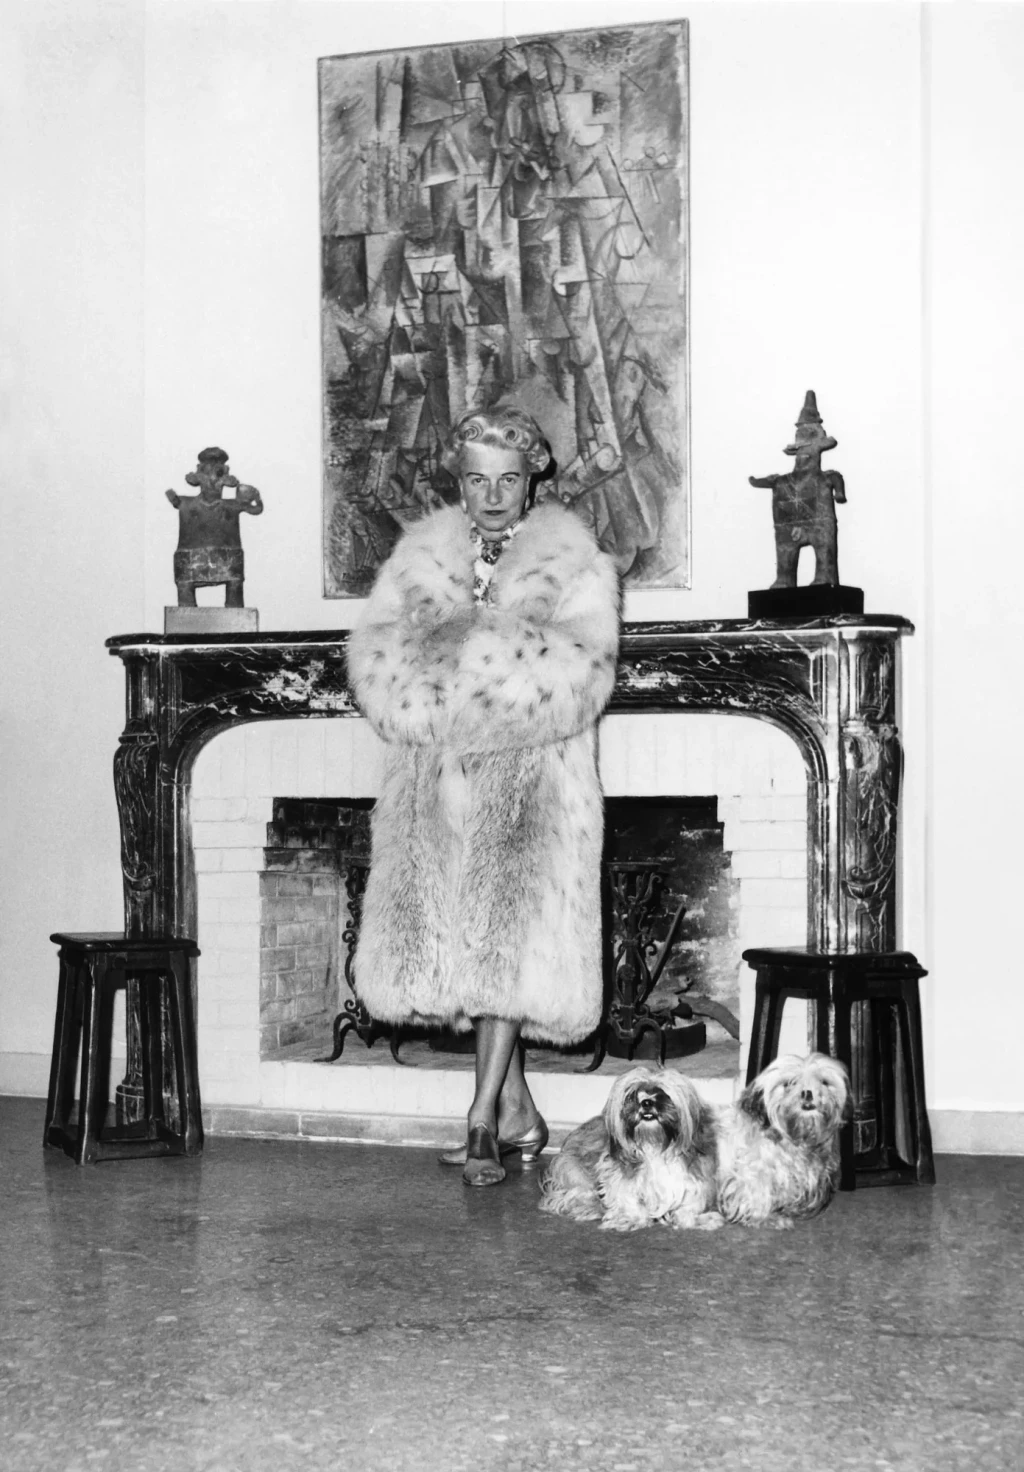 Marguerite "Peggy" Guggenheim was an American art collector, bohemian and socialite.